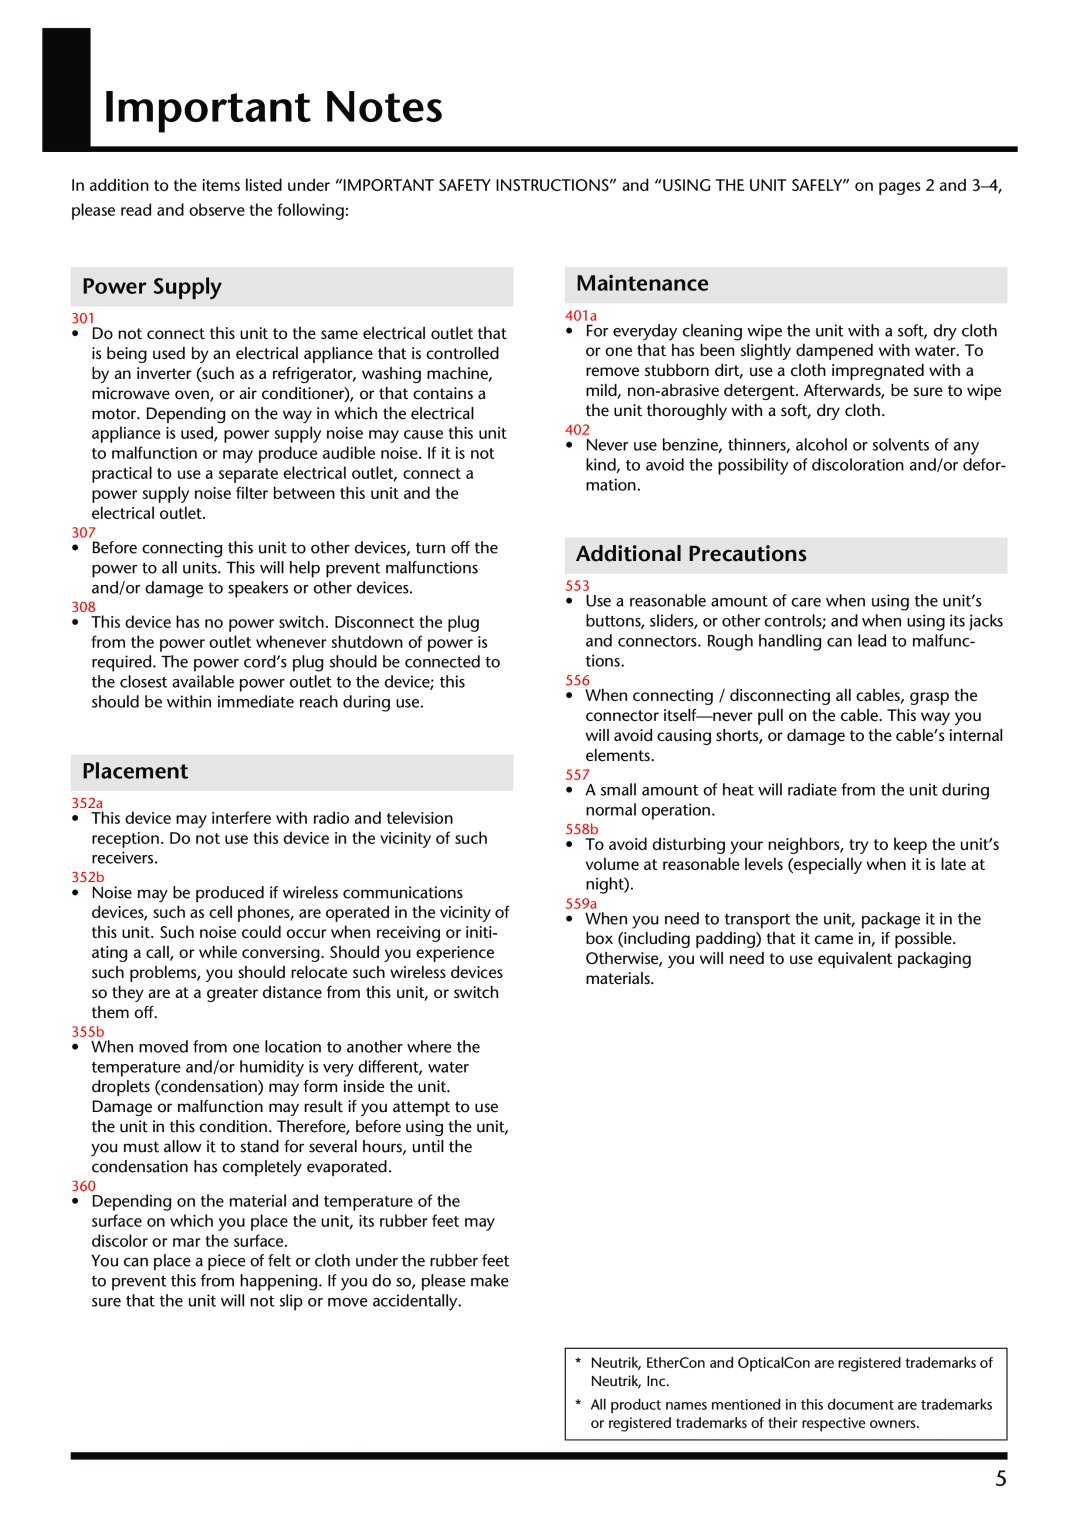 Roland S-OPT owner manual Important Notes, Power Supply, Placement, Maintenance, Additional Precautions 